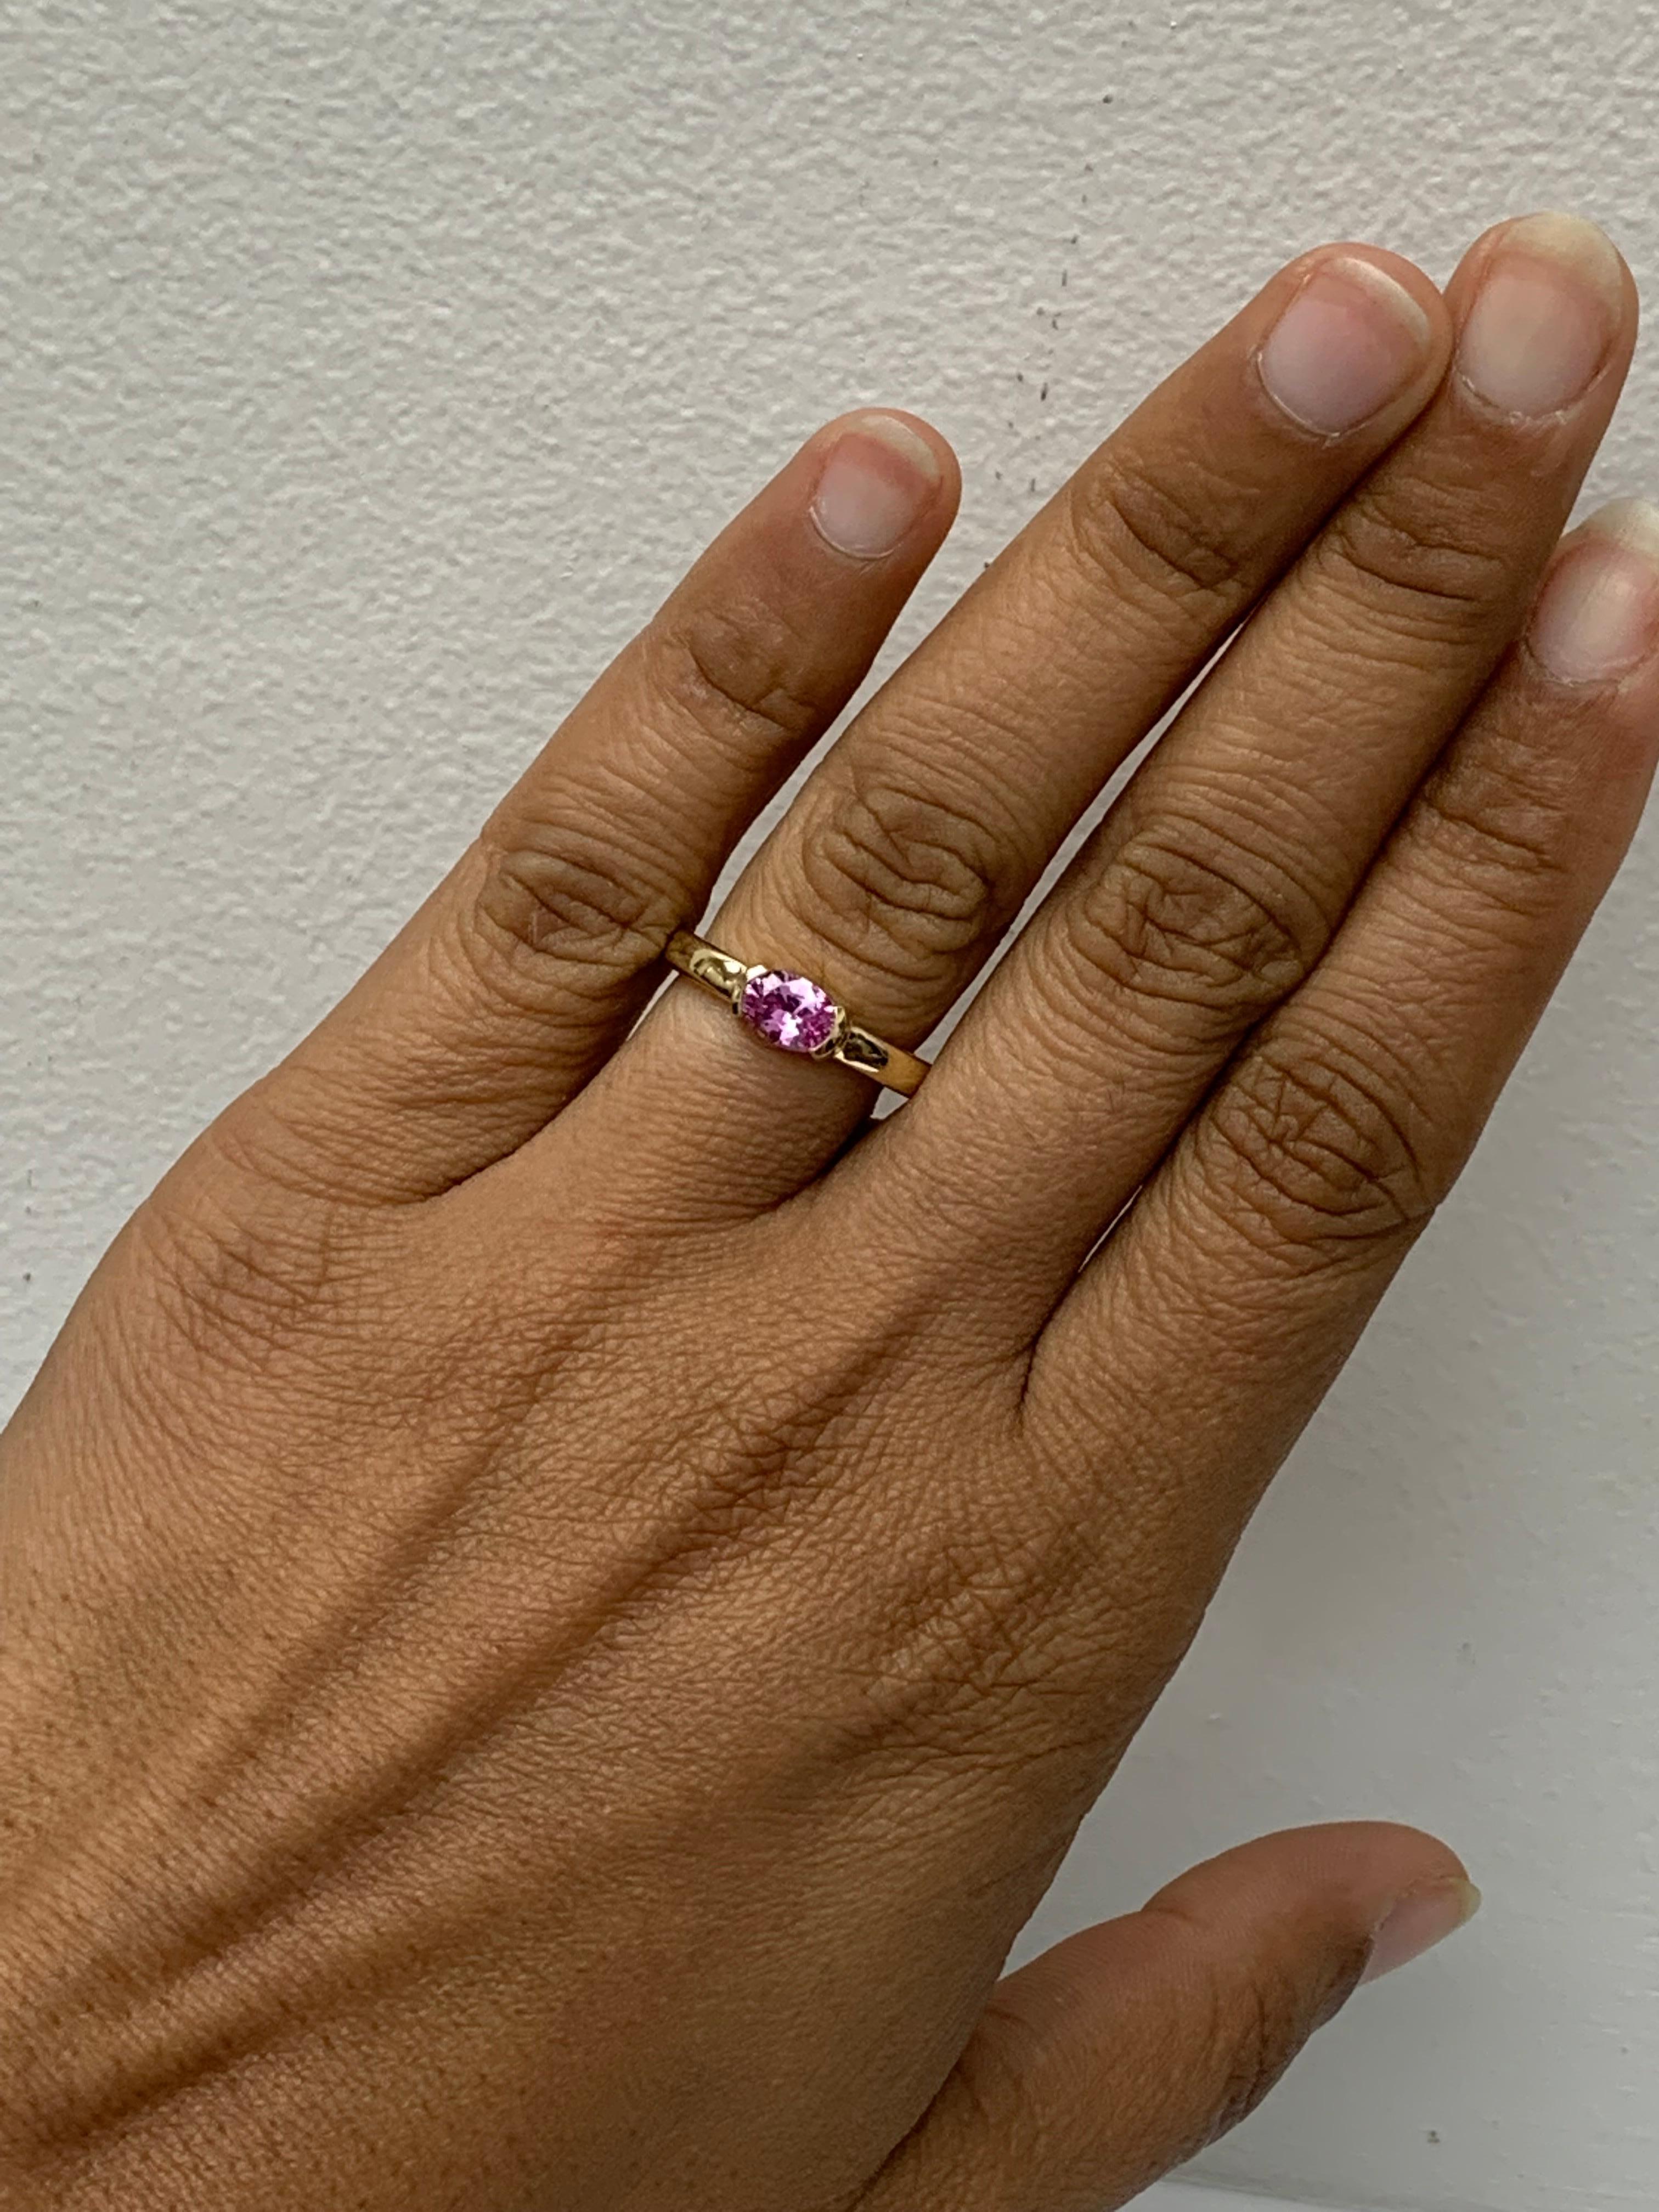 0.73 Carat Oval Cut Pink Sapphire Band Ring in 14K Yellow Gold For Sale 4